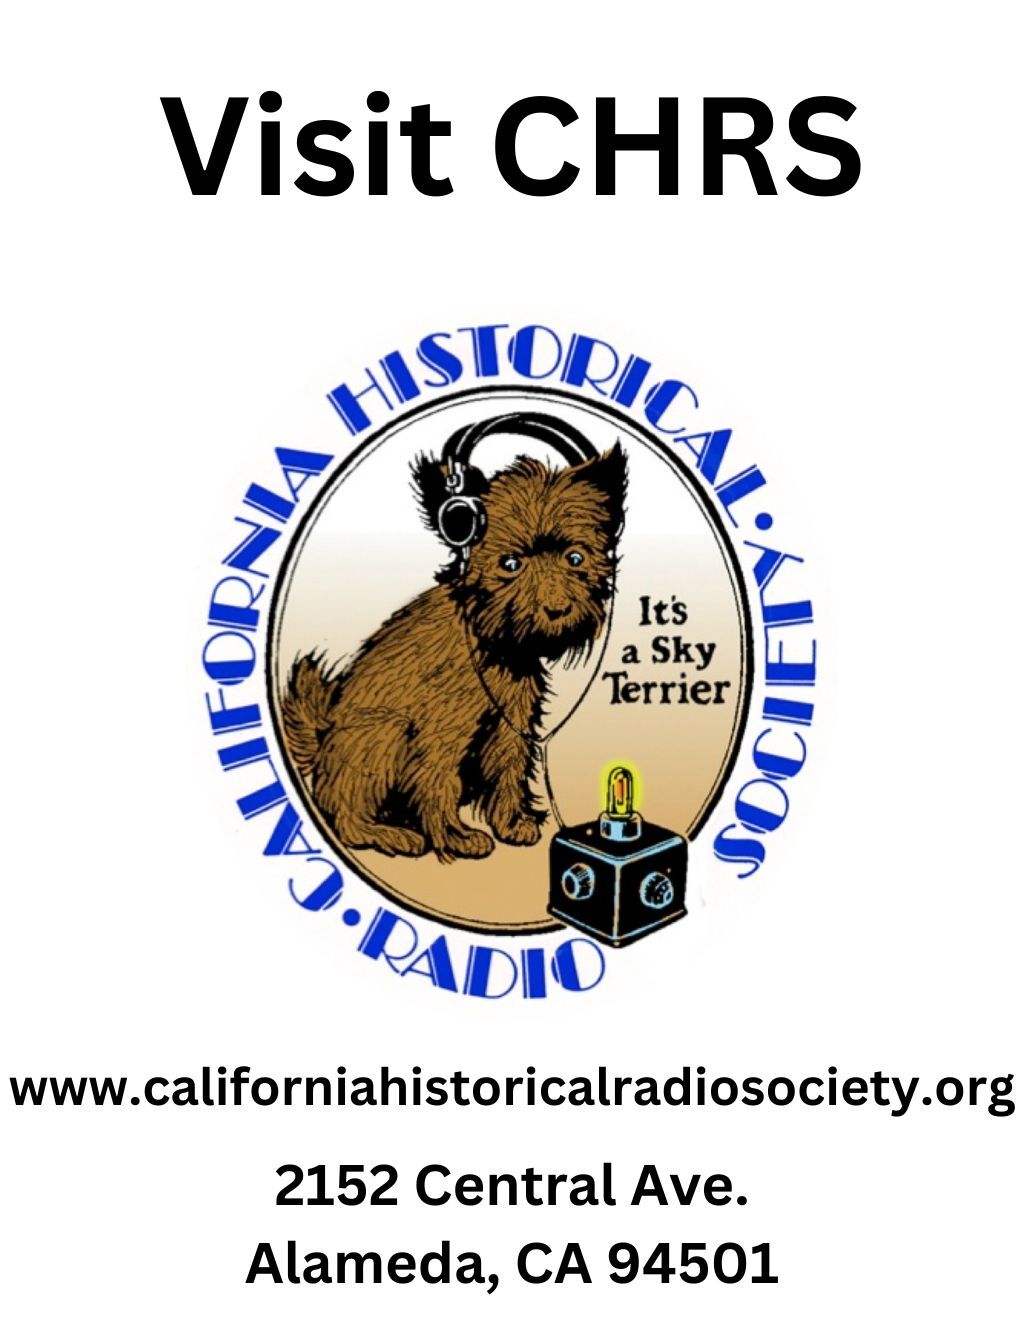 California Historical Radio Society Visit the CHRS Museum and Discover the History of Radio promotion flier on Digifli com